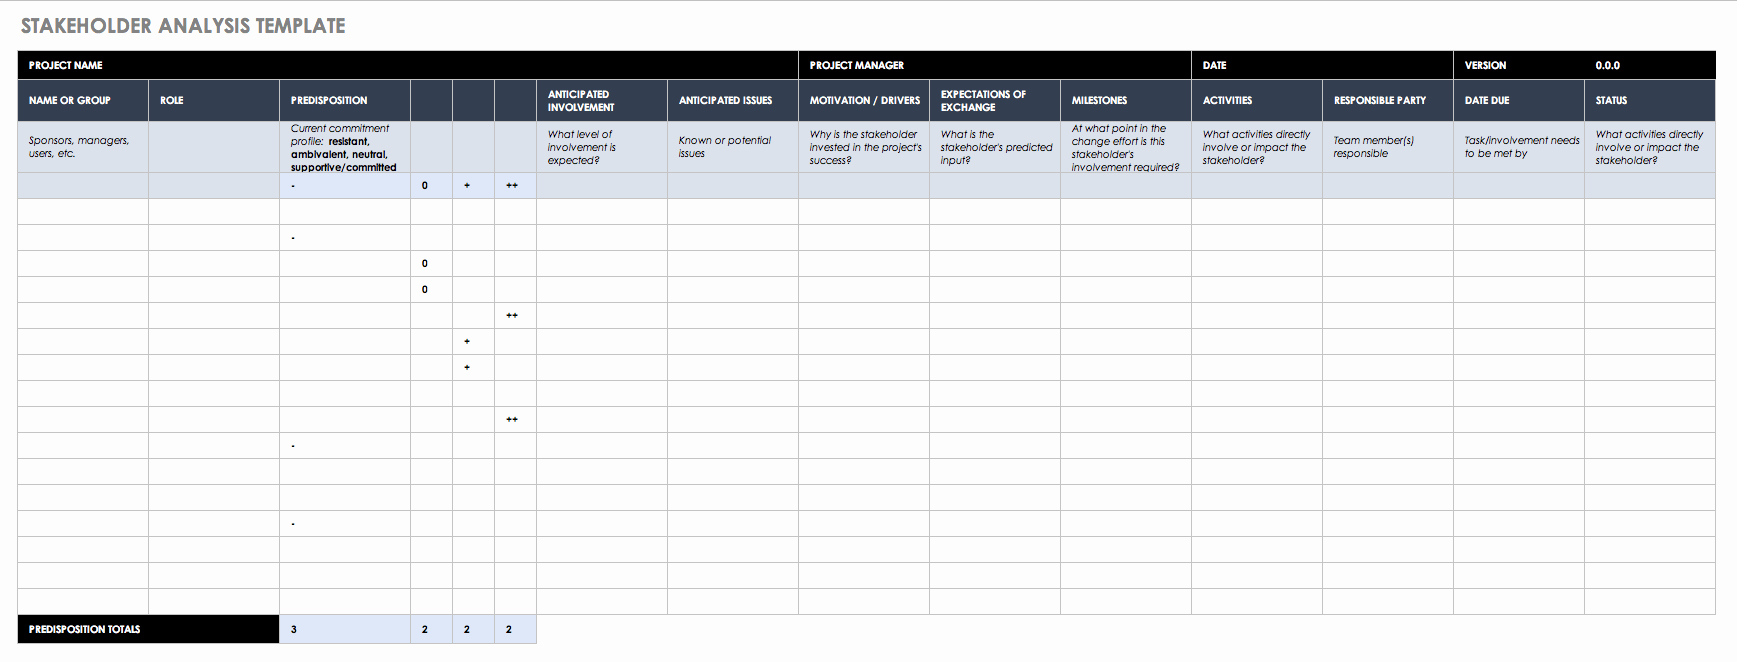 Stakeholder Analysis Template Excel Awesome Free Lean Six Sigma Templates